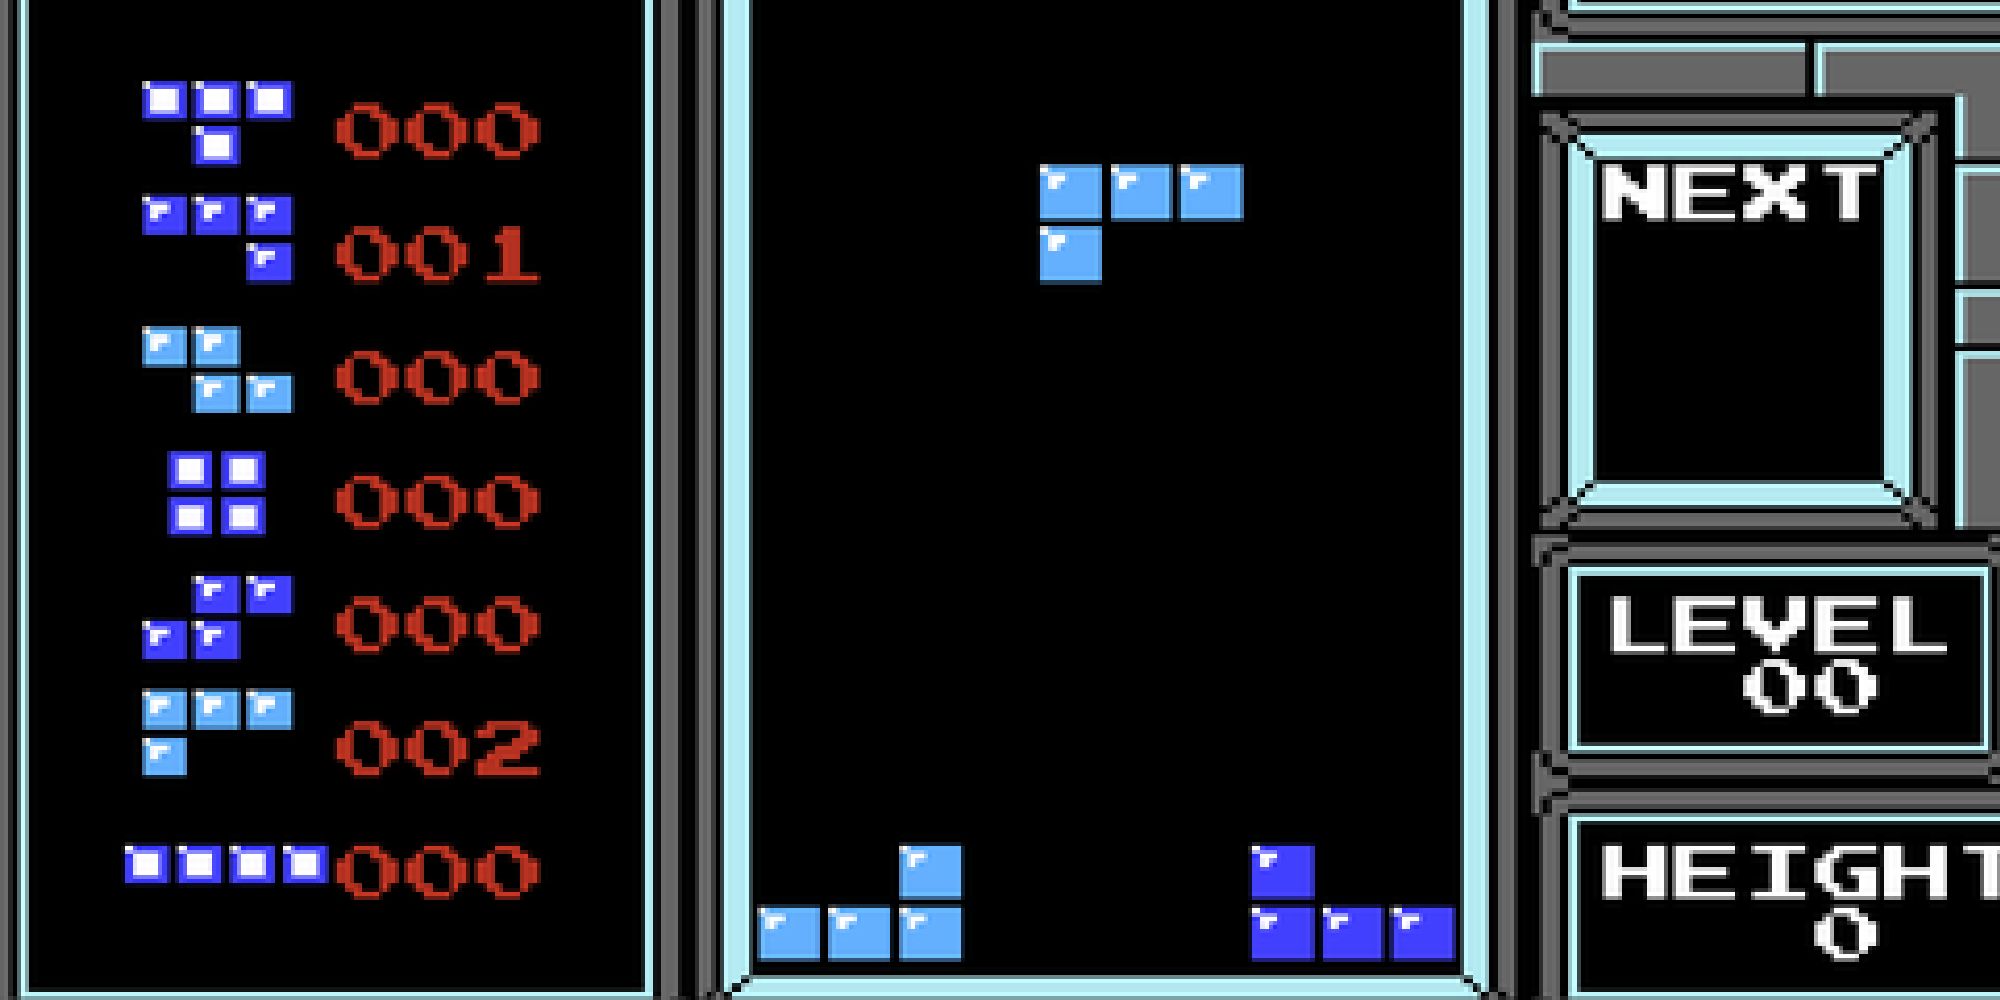 A game of Tetris on NES